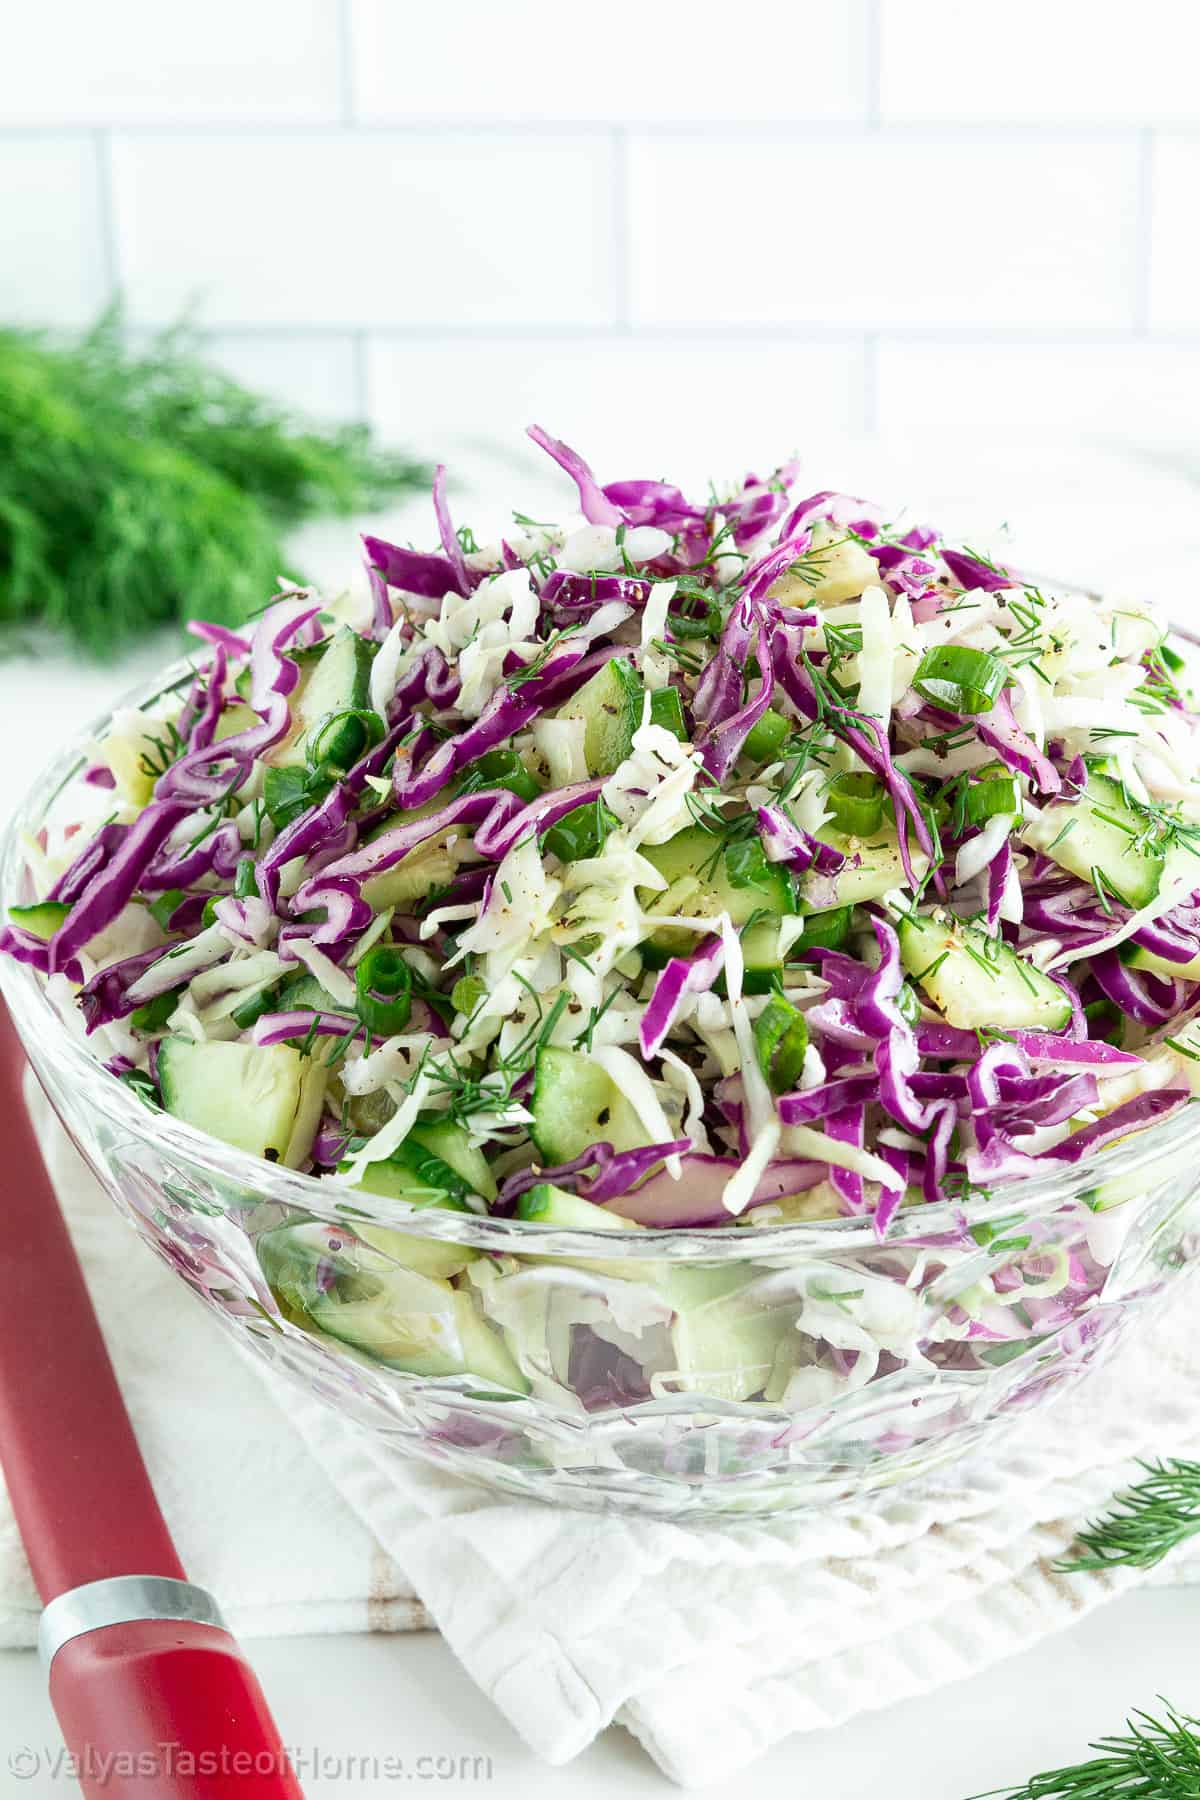 With bright flavors, a zesty kick from lemon juice, and packed with red cabbage goodness, this salad is absolutely perfect.